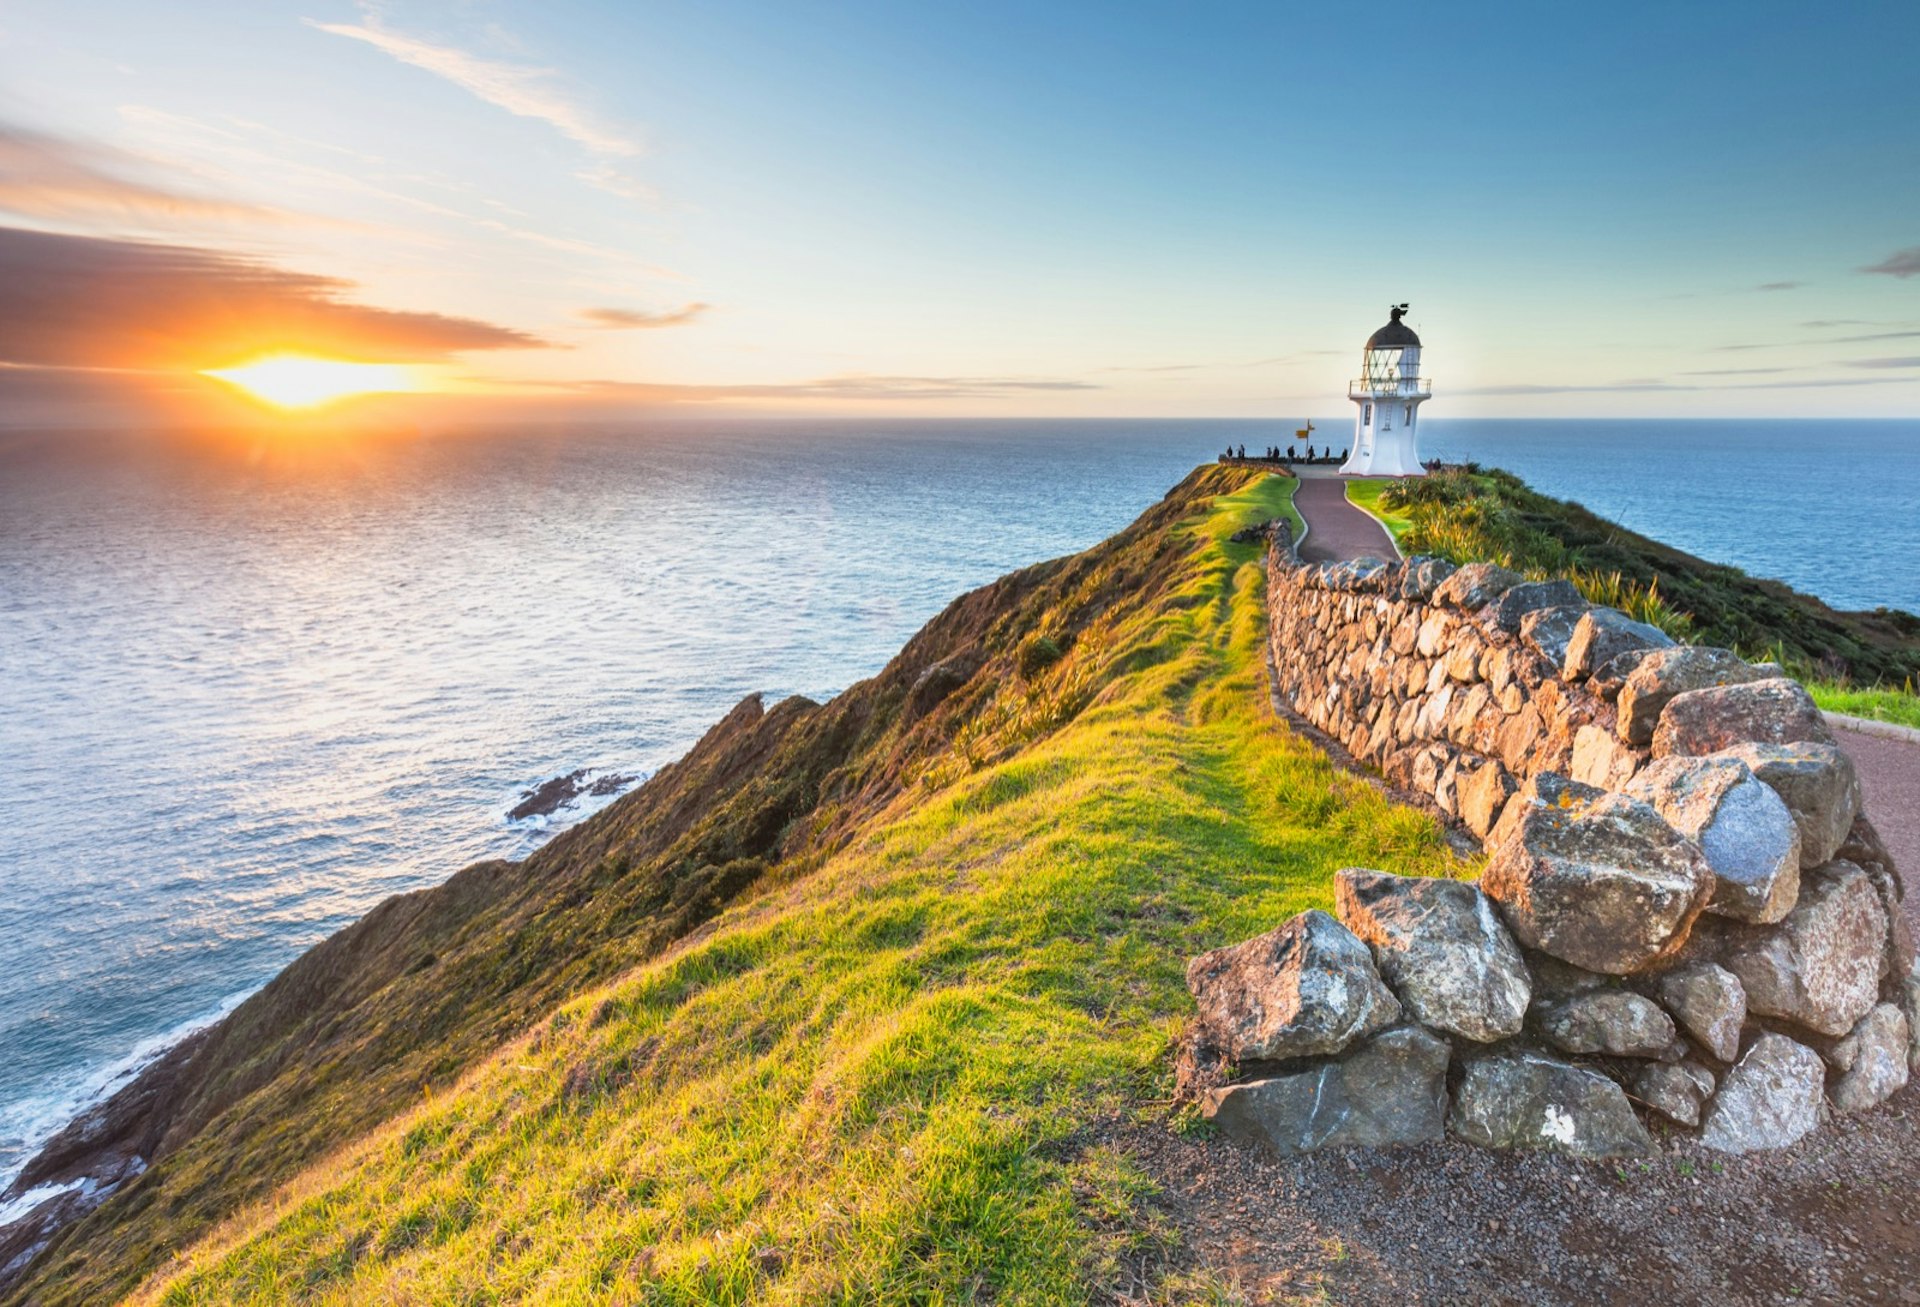 A golden sun pierces a dark cloud on the horizon as it sets into the ocean, the rest of the sky is various hues of beautiful blue; in the foreground is a rocky Cape Reinga, with its narrow flat top lined with grass and a stone wall that flanks a paved path to the Cape Reinga Lighthouse